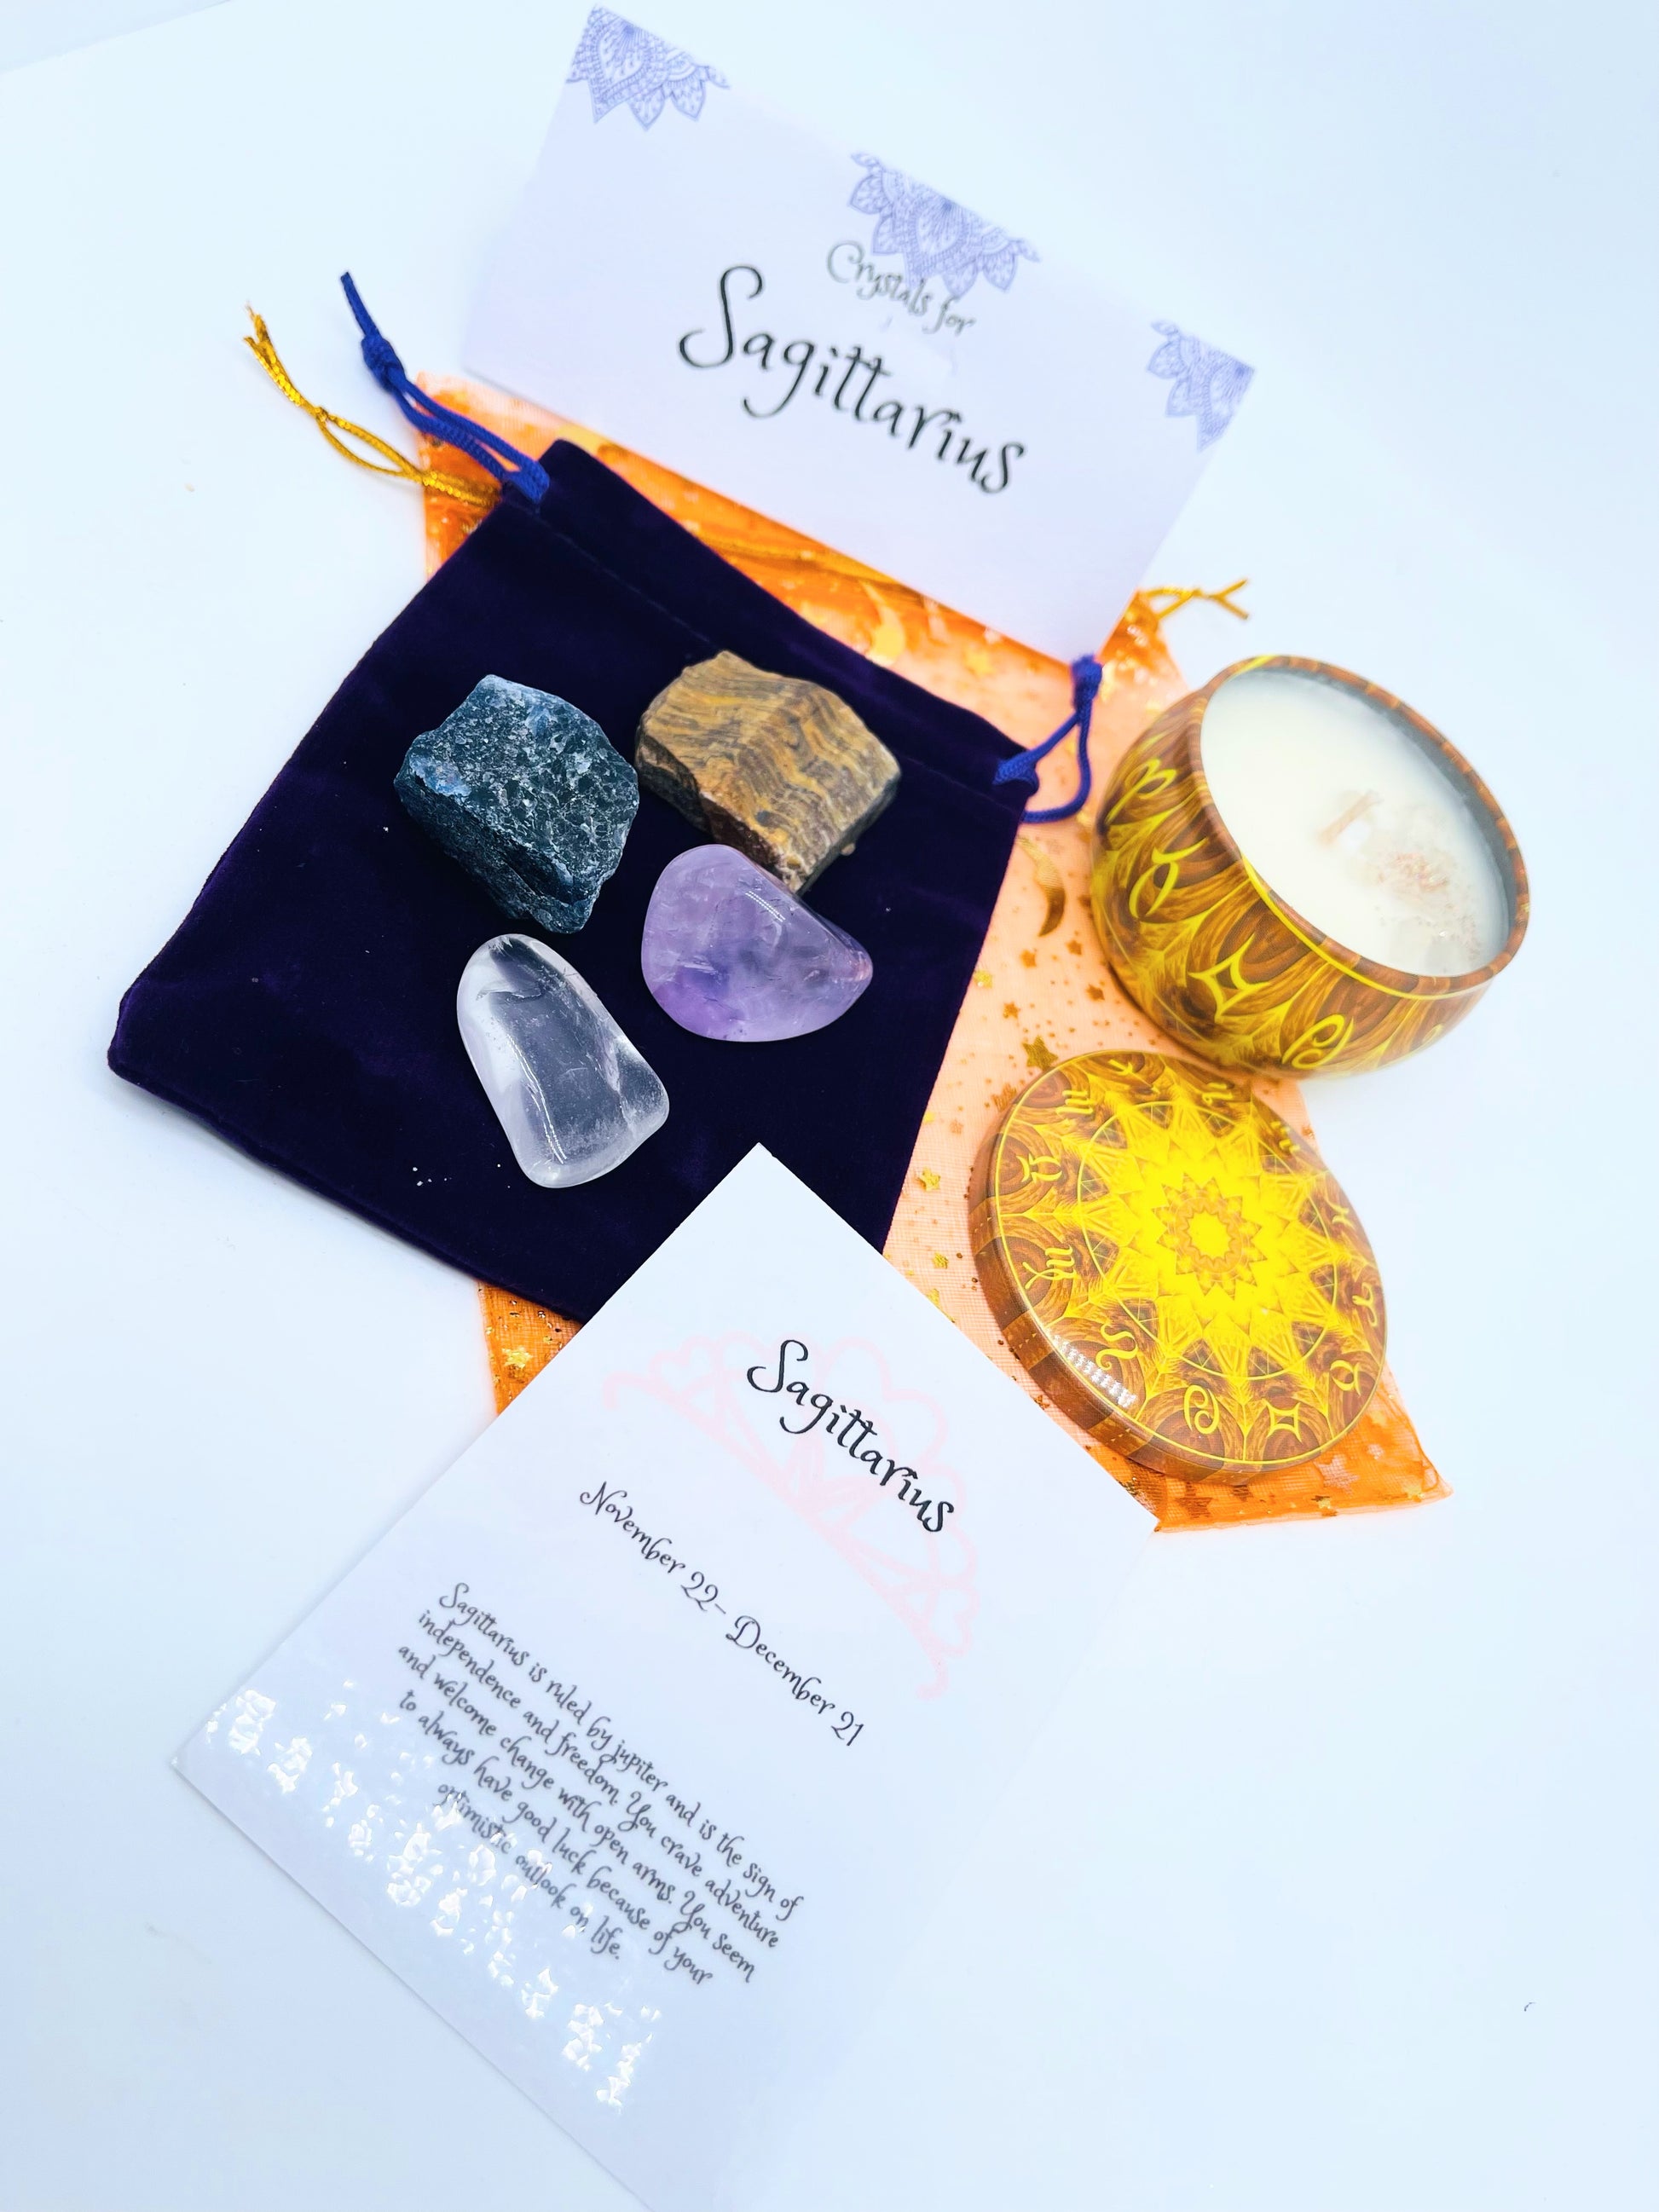 Sagittarius zodiac candle gift set with candle and four crystals for this sign sitting on a velvet bag.